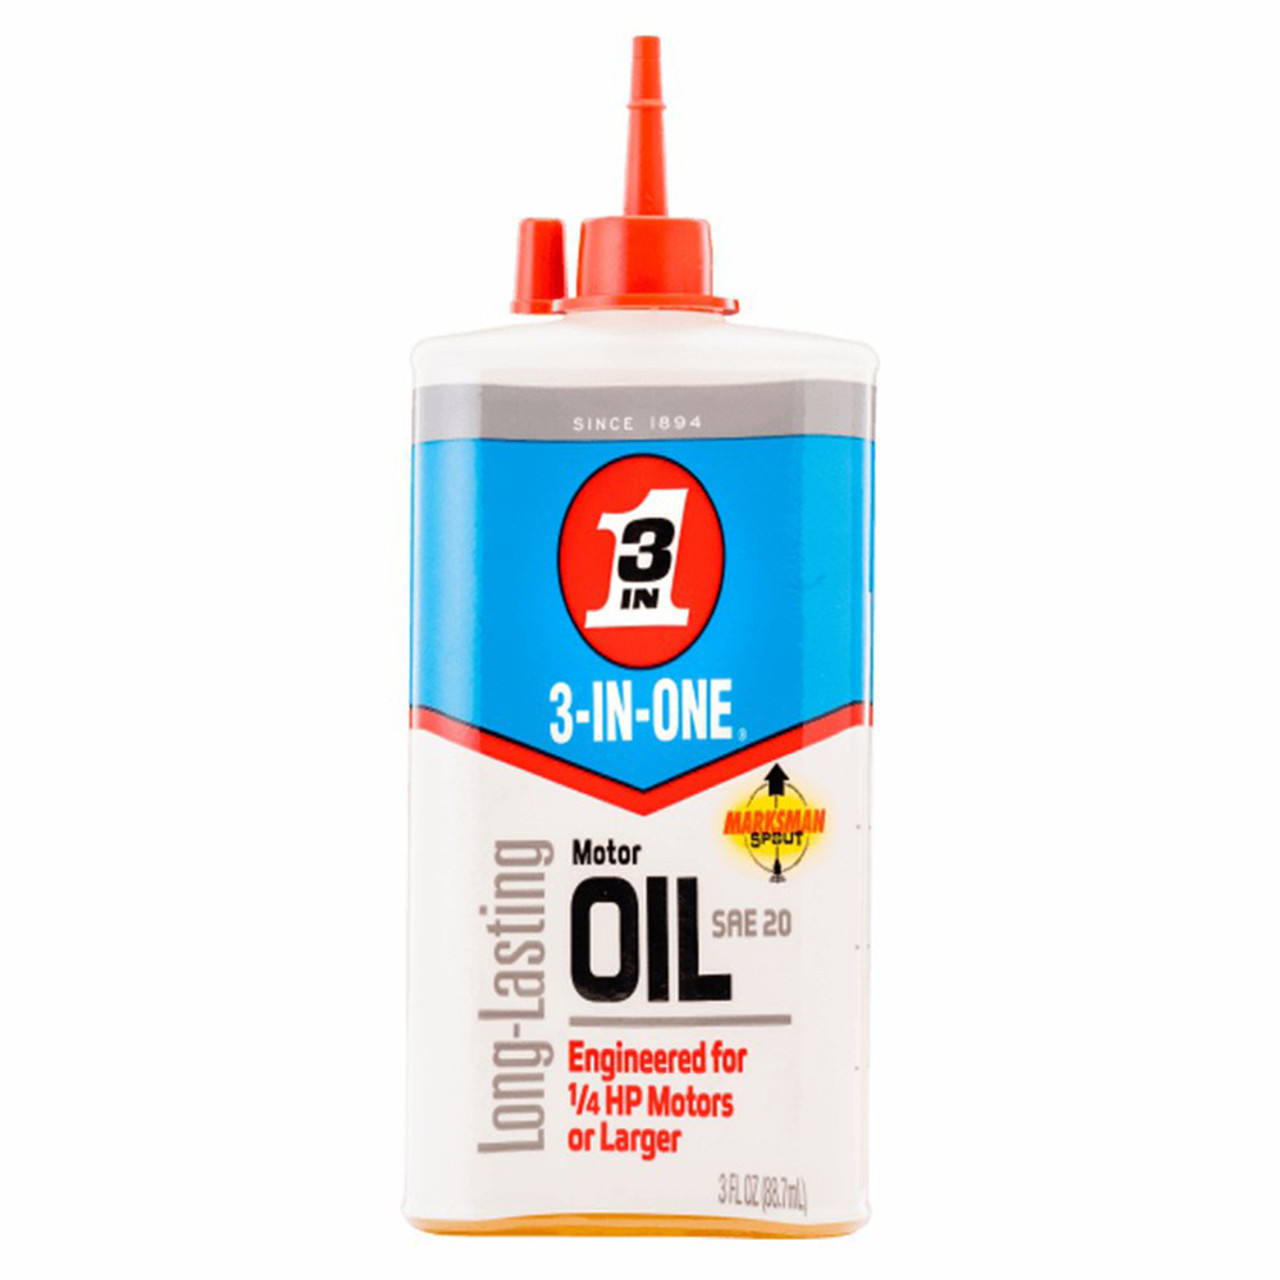 3-In-One Electric Motor Oil